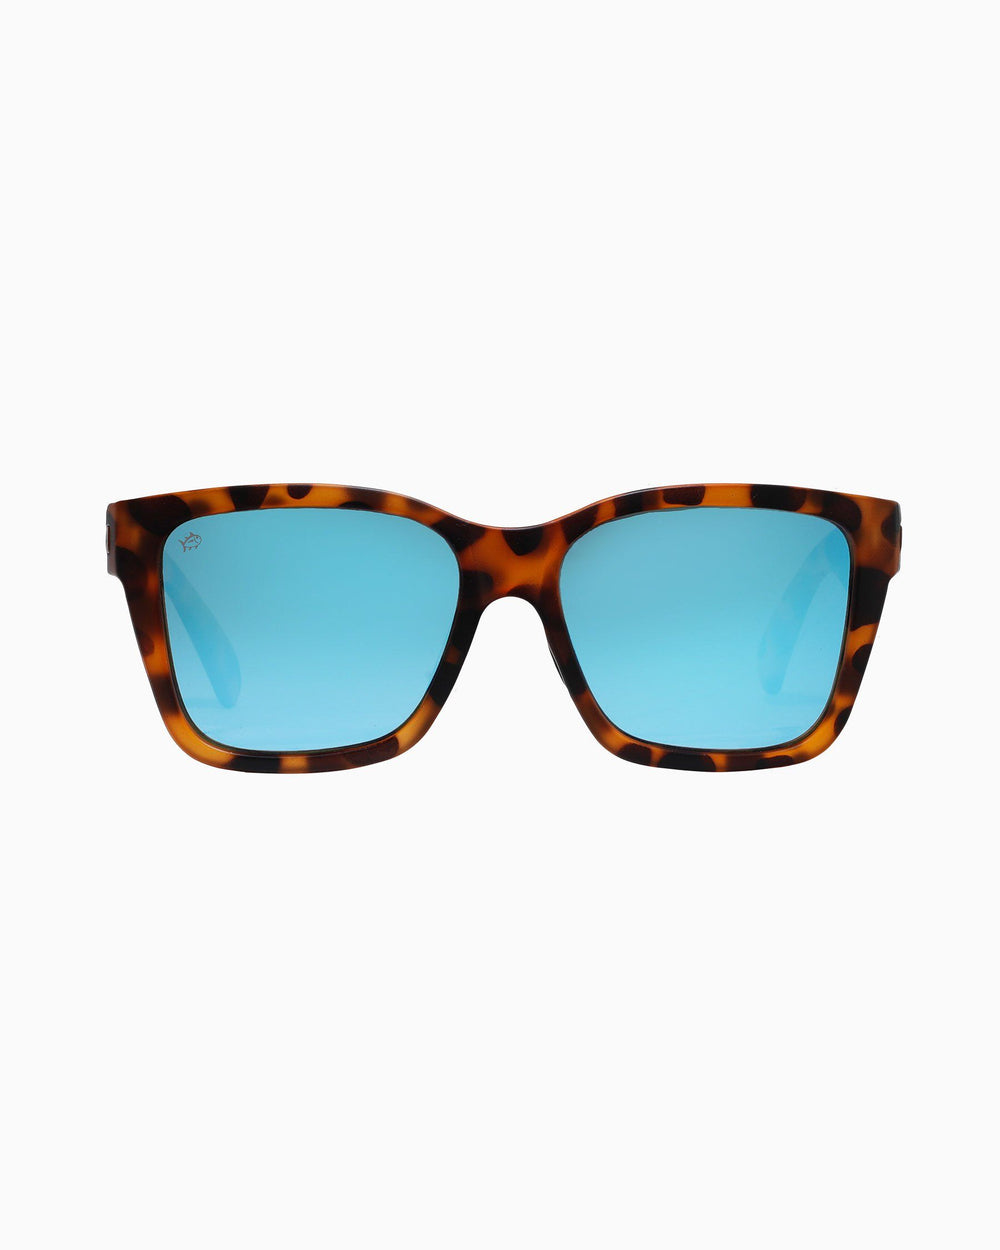 The front of the Rheos Edistos Sunglasses by Southern Tide - Tortoise Marine